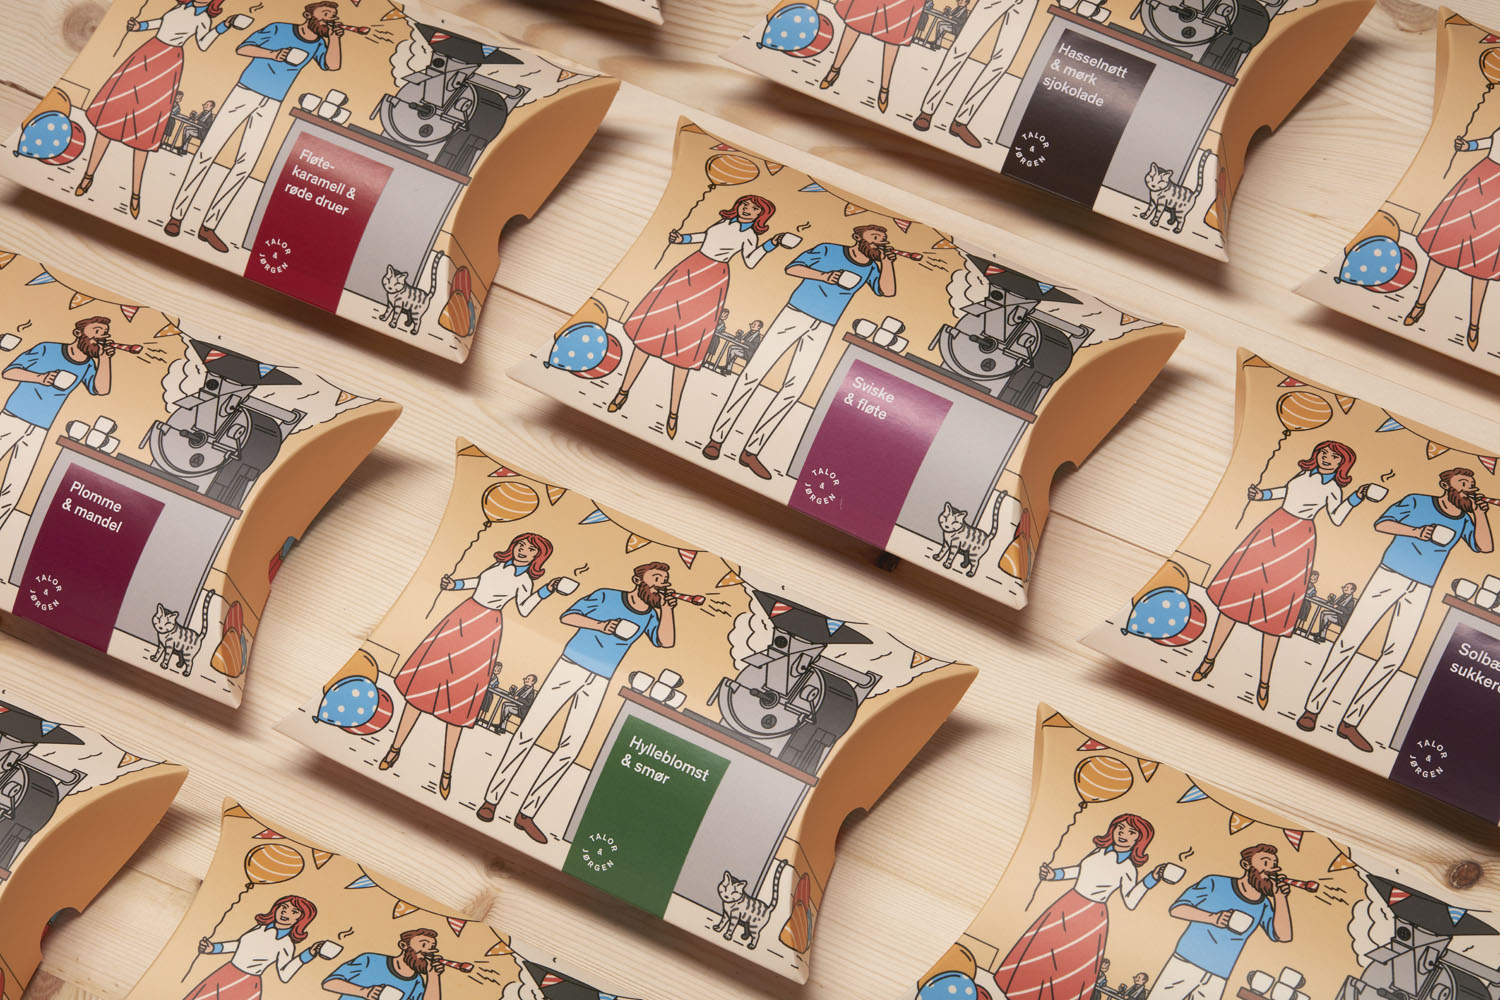 Packaging design by Olso-based Bielke & Yang for Norwegian coffee roastery and subscription service Talor & Jørgen